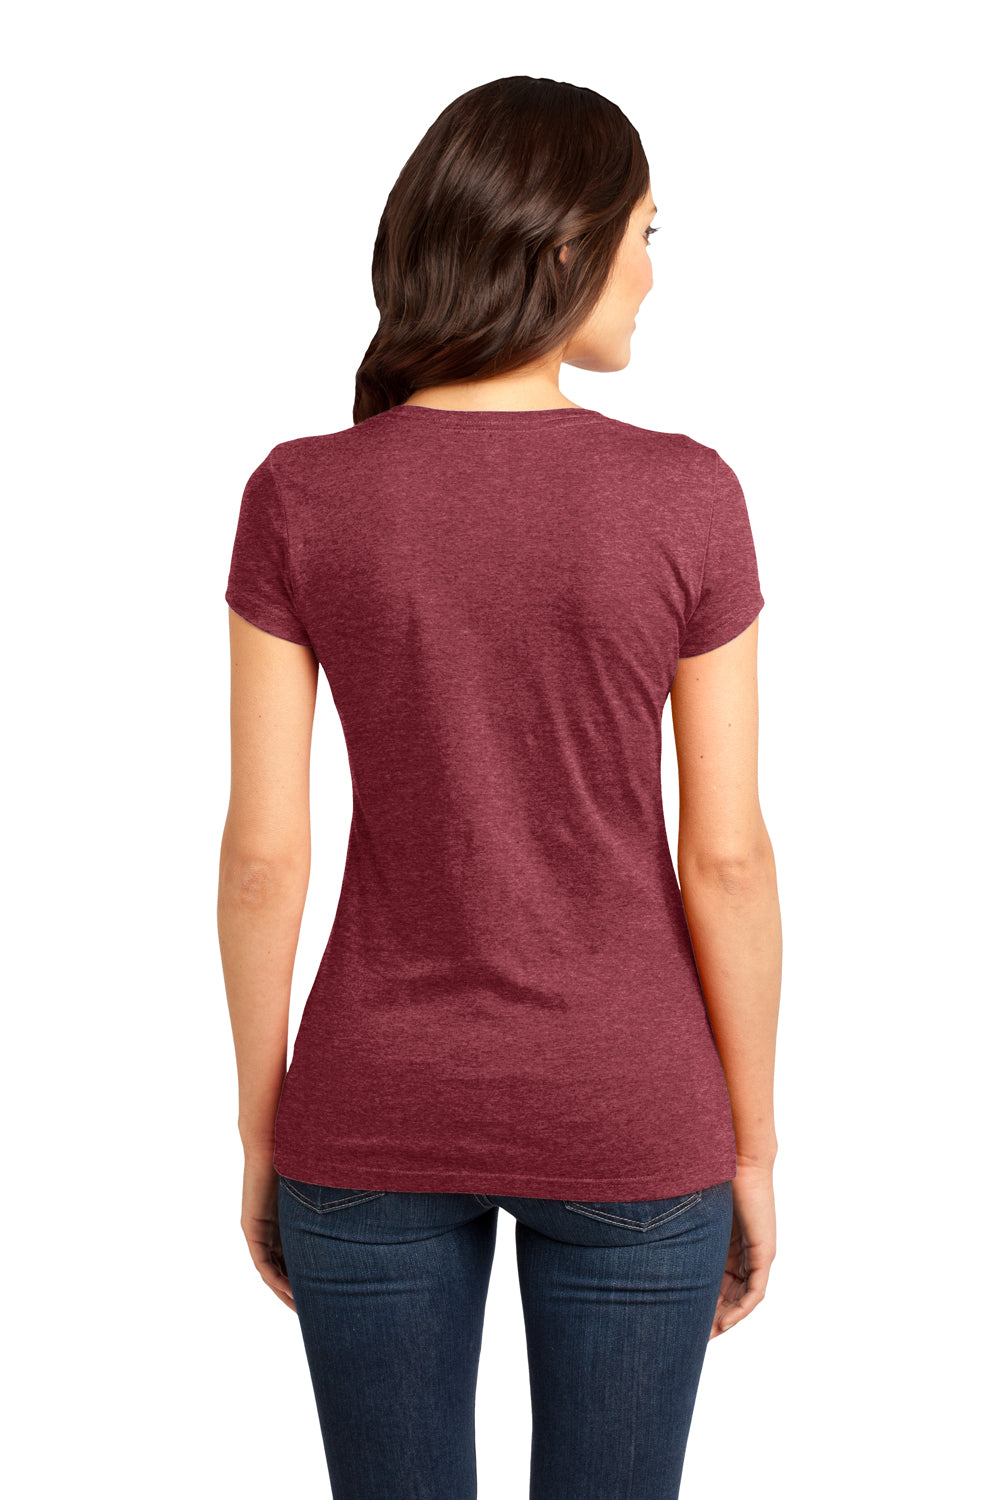 District DT6001 Womens Very Important Short Sleeve Crewneck T-Shirt Heather Red Back